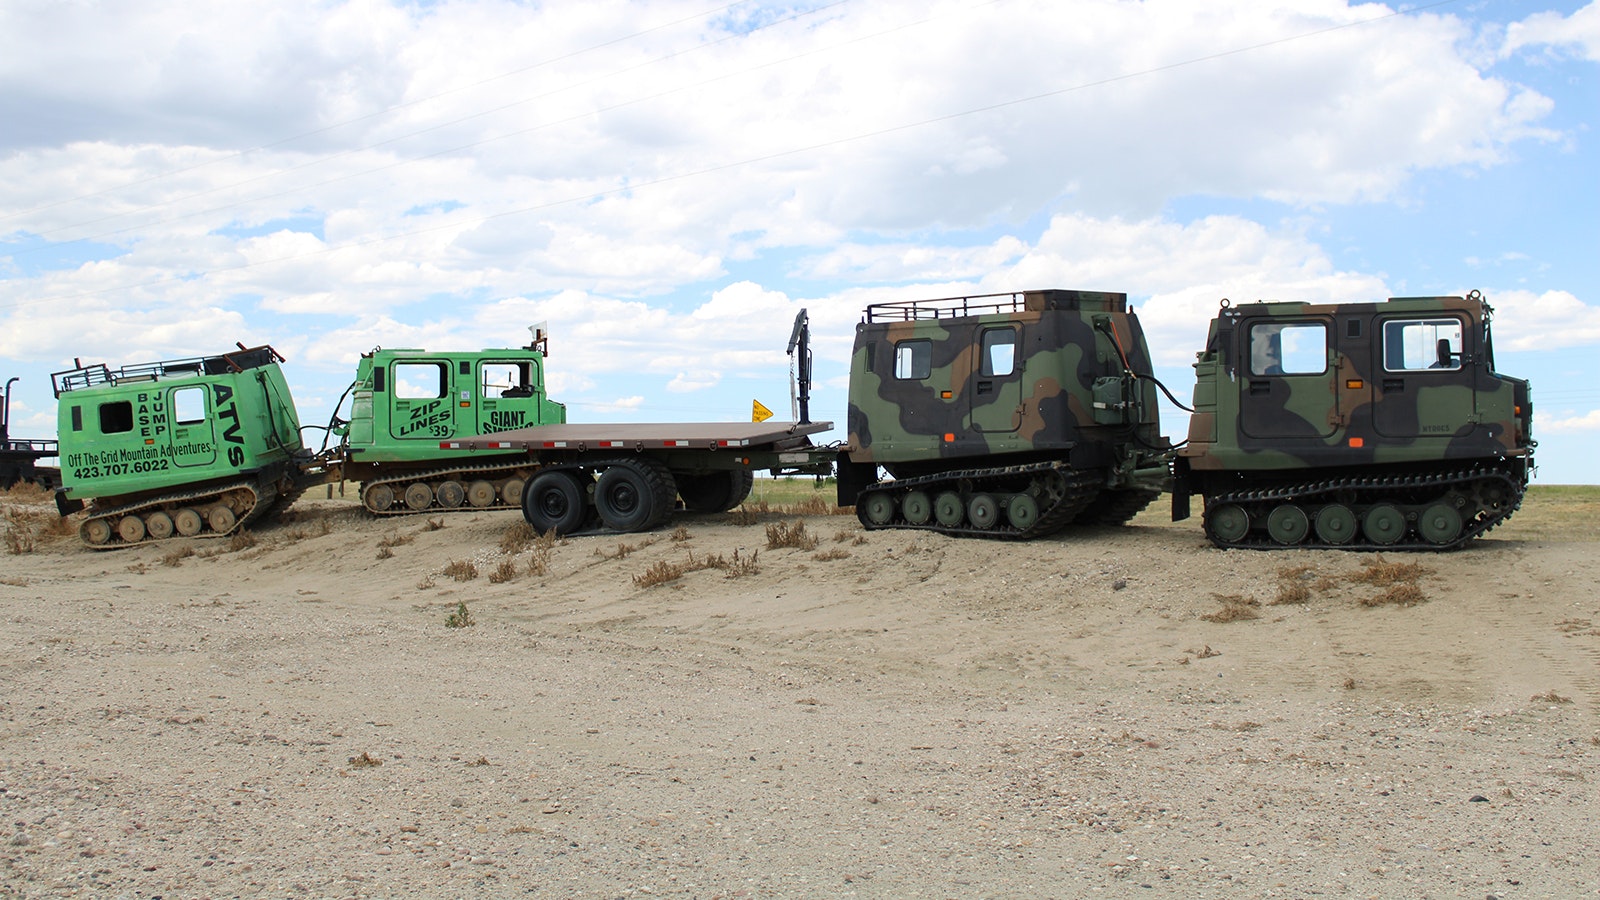 The caterpillar-looking Hagglund vehicles are heavy duty, making them perfect for emergency response in rugged and severe terrain and conditions.